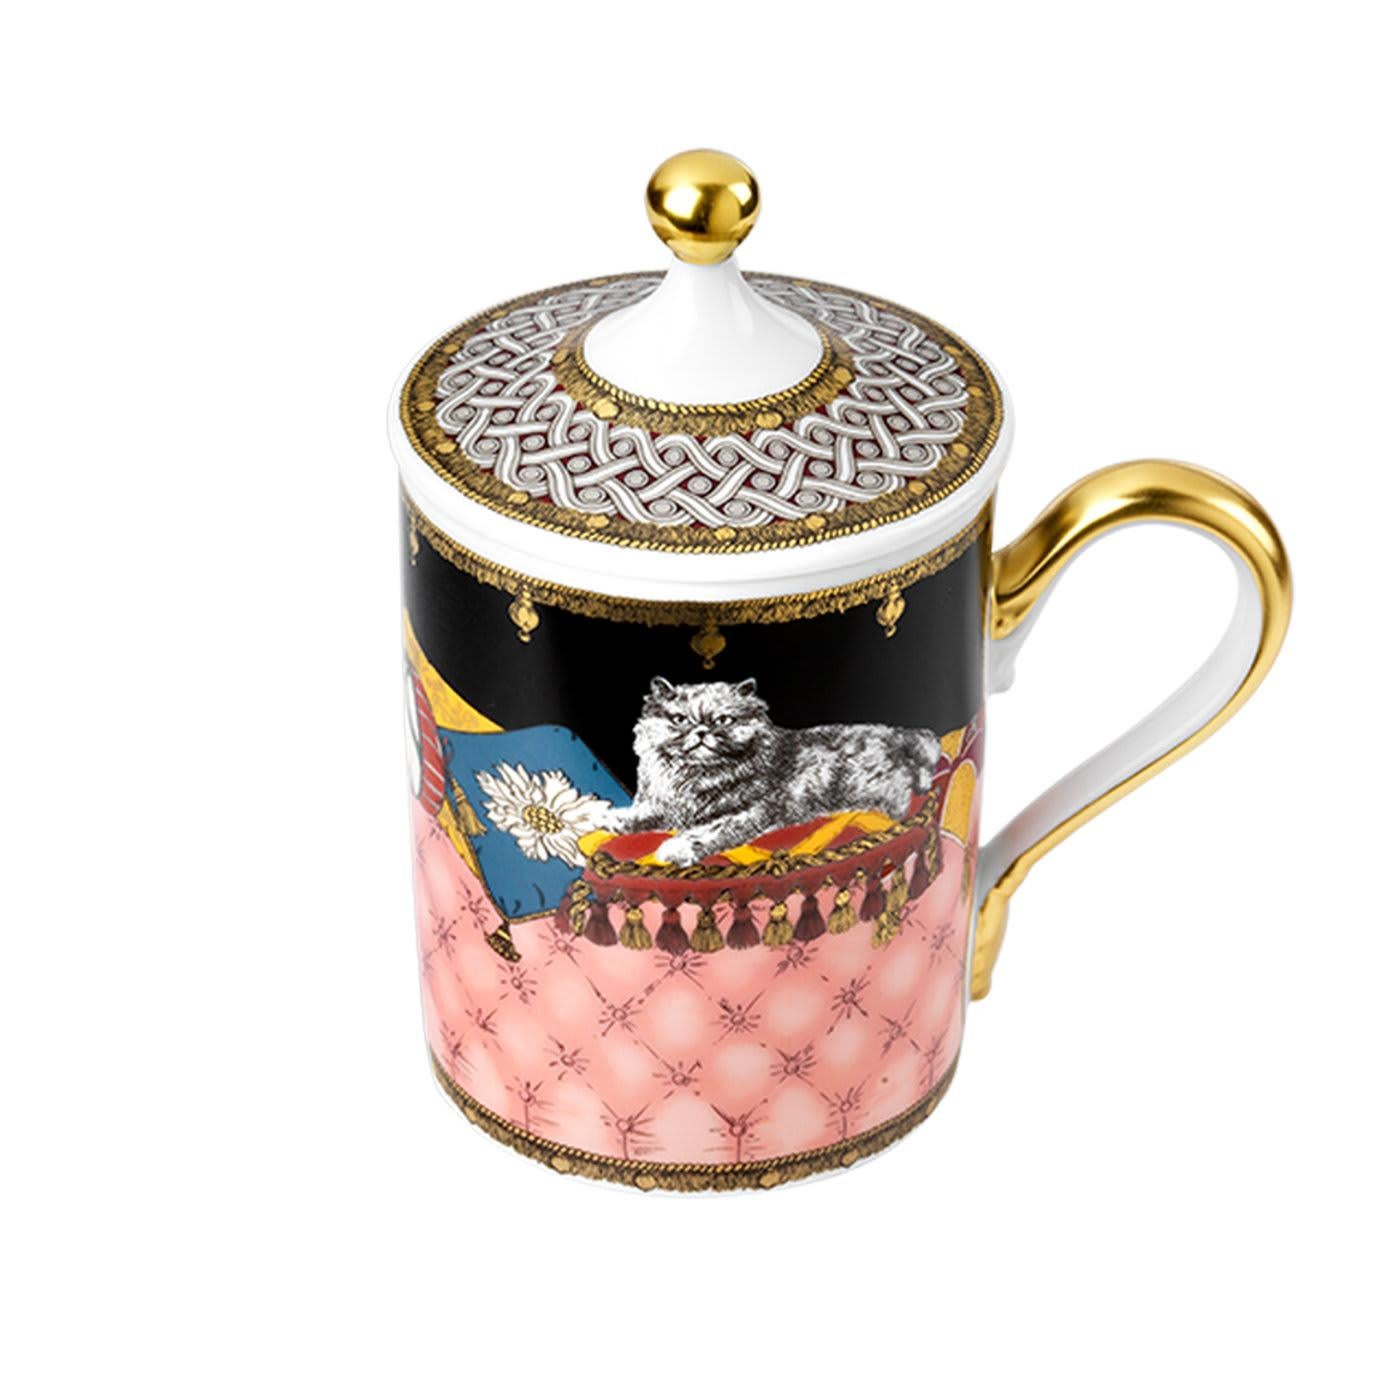 This exclusive porcelain mug with lid from the Totem Collection is a contemporary take on porcelain cups from the 18th century, which were adorned with decorations of symbolic animals. Dedicated to the cat - a species associated with independence